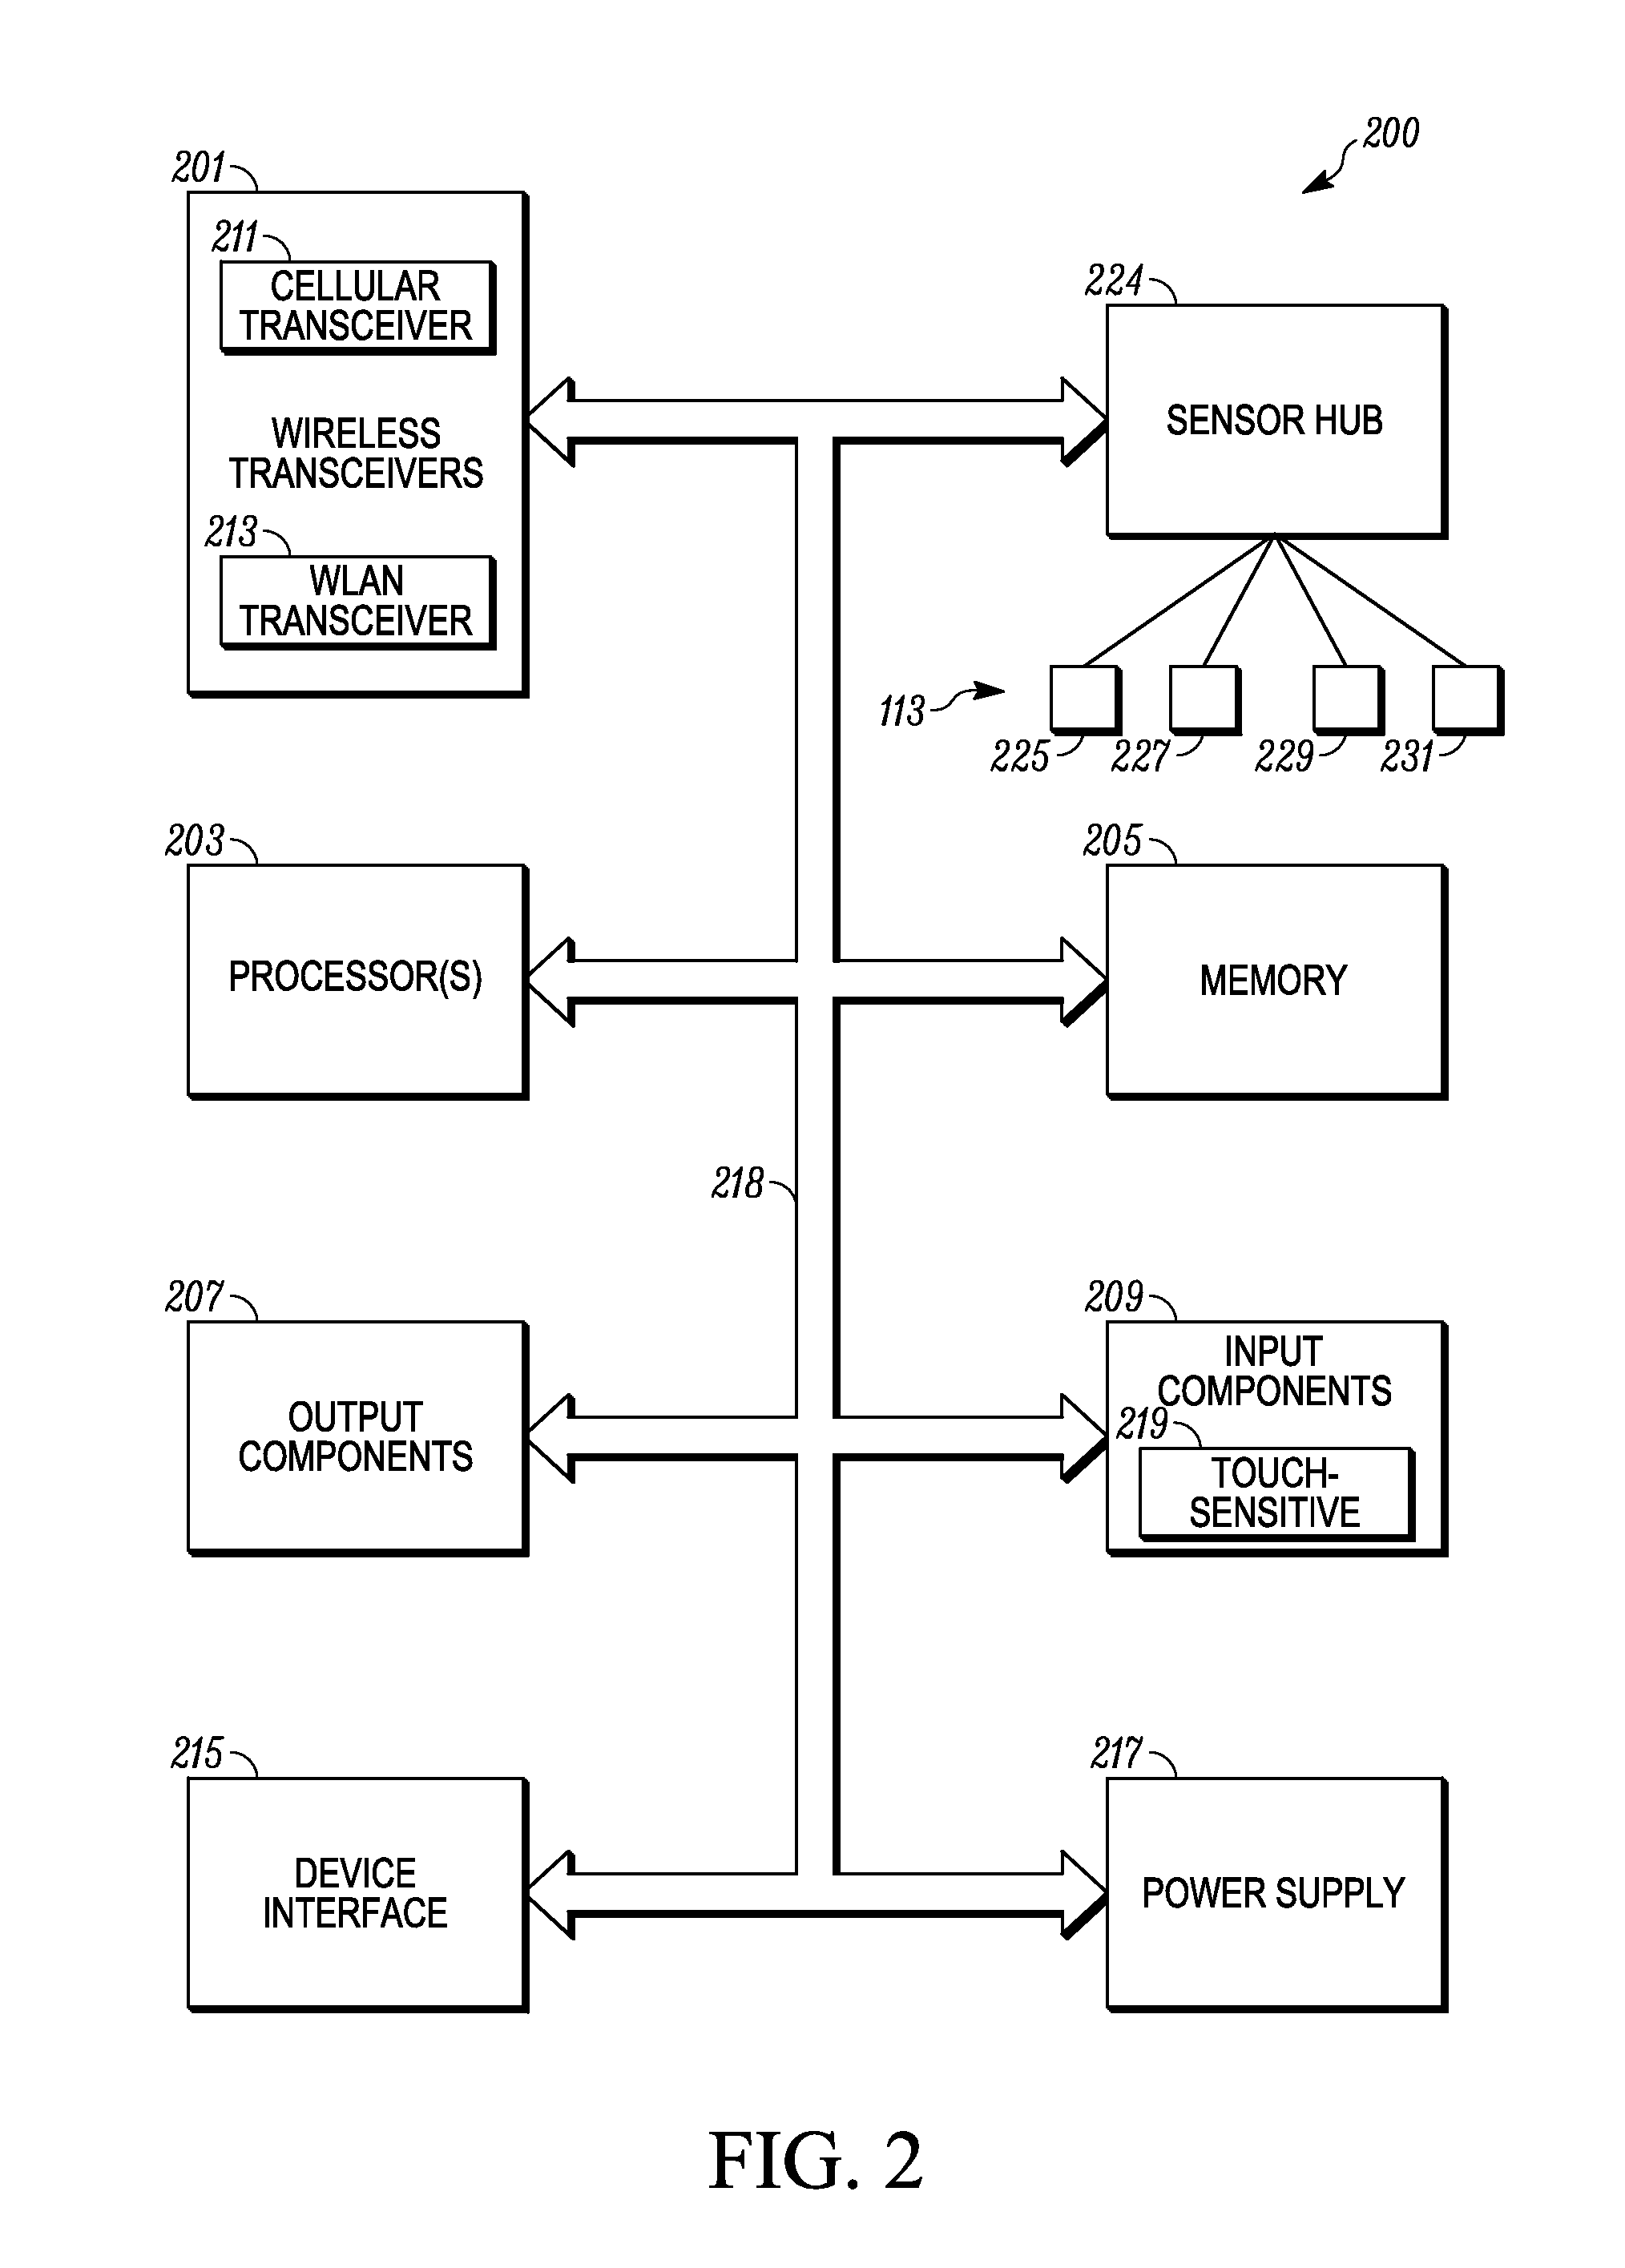 Electronic device with enhanced method of displaying notifications